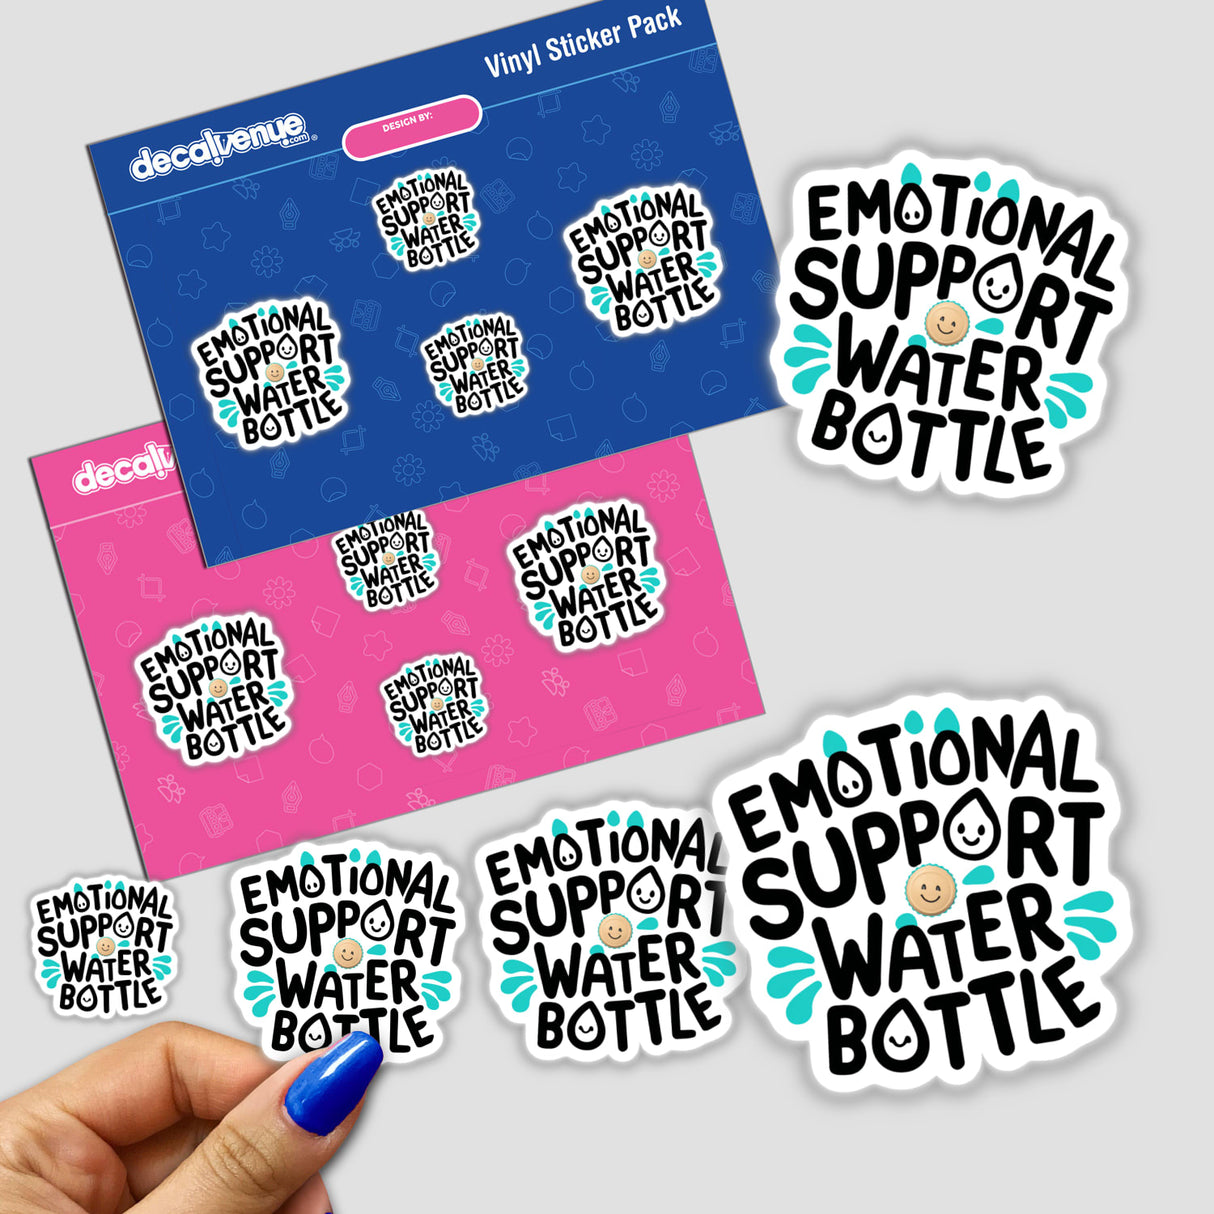 Colorful stickers showcasing the "Emotional Support Water Bottle" design, featuring playful and expressive typography against a vibrant background. The stickers are displayed on a blue and pink vinyl sticker pack, highlighting the product's digital artwork nature.